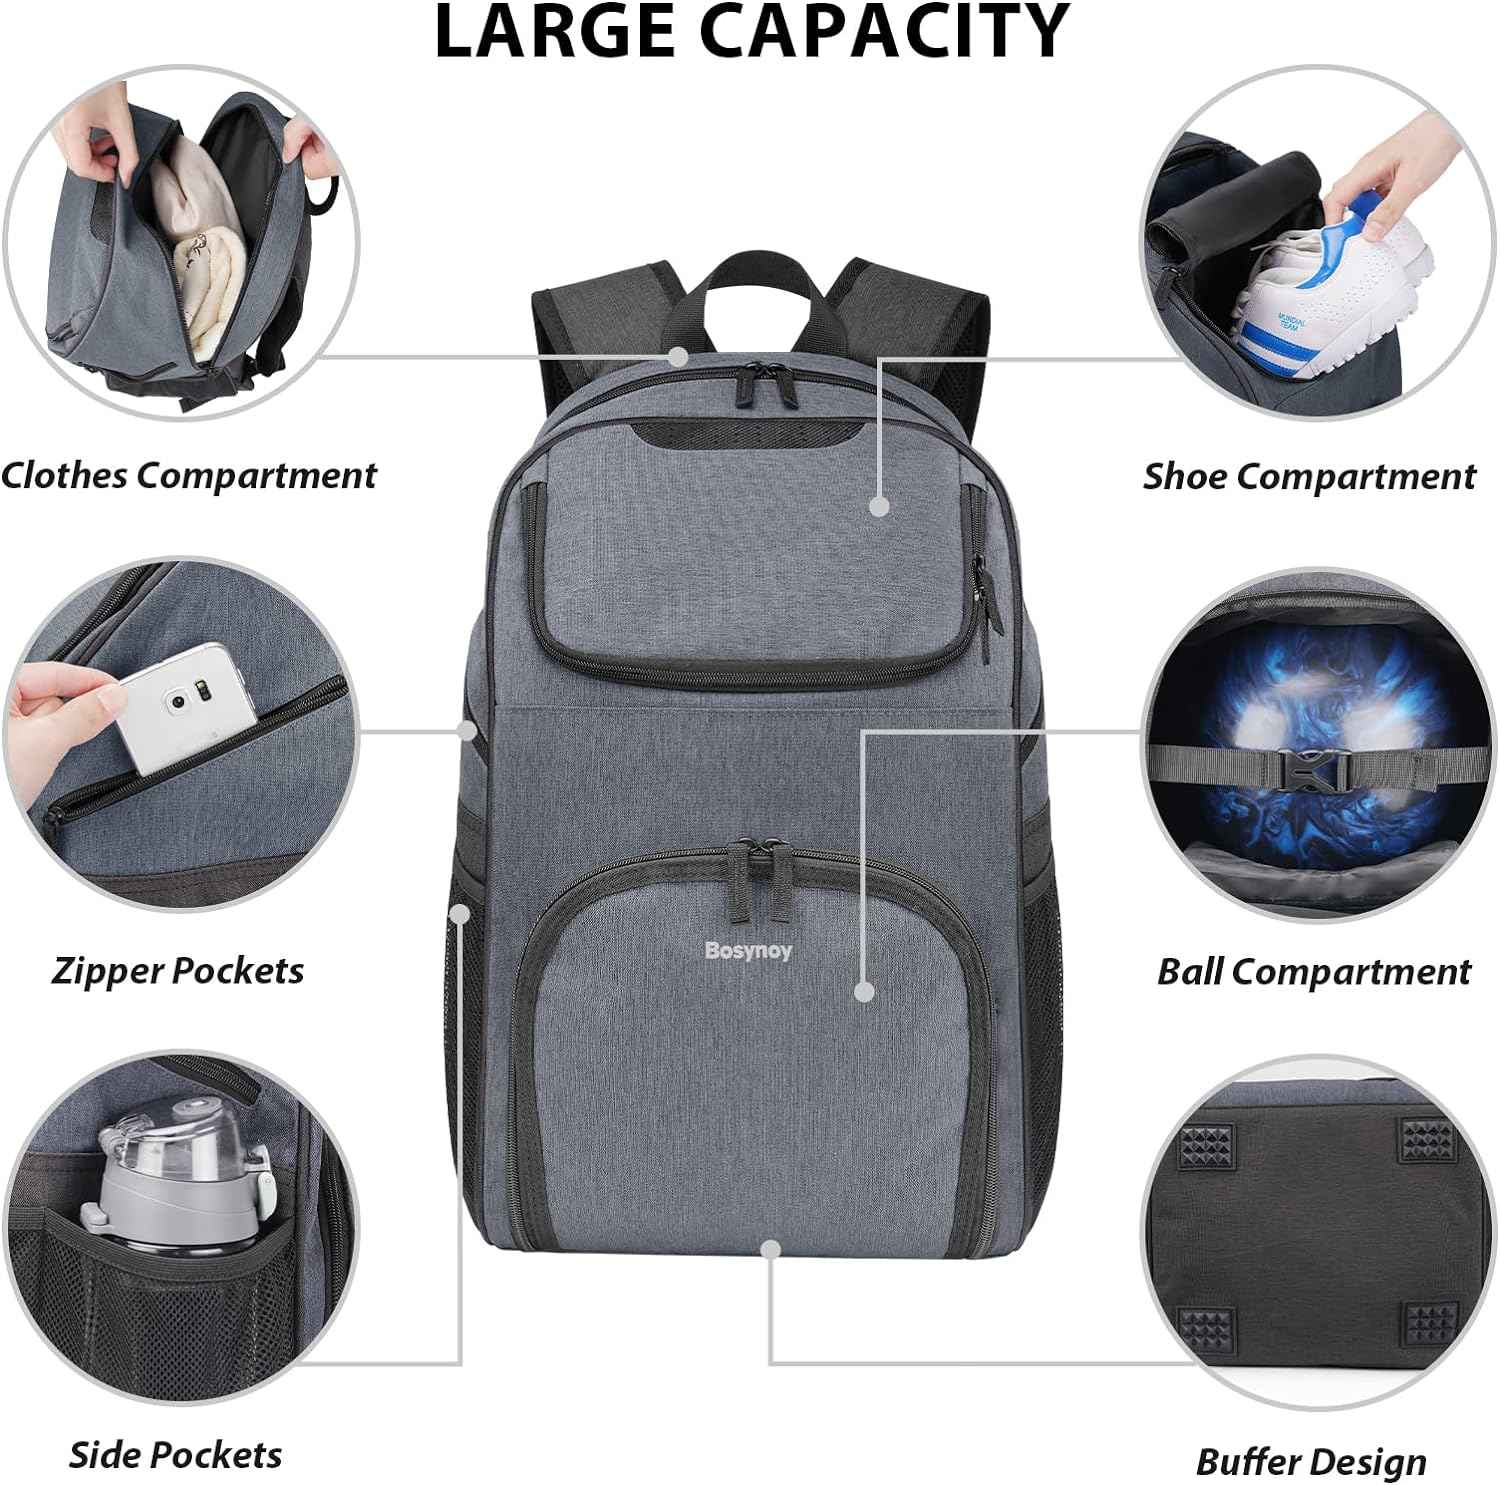 Bowling Backpack, Bowling Ball Bag for Single Ball with Shoe Compartment Portective Foam Padded, Fits Bowling Shoes Up to US Mens Size 16 and Multi-Pockets for Accessories, Gifts for Bowling Lovers